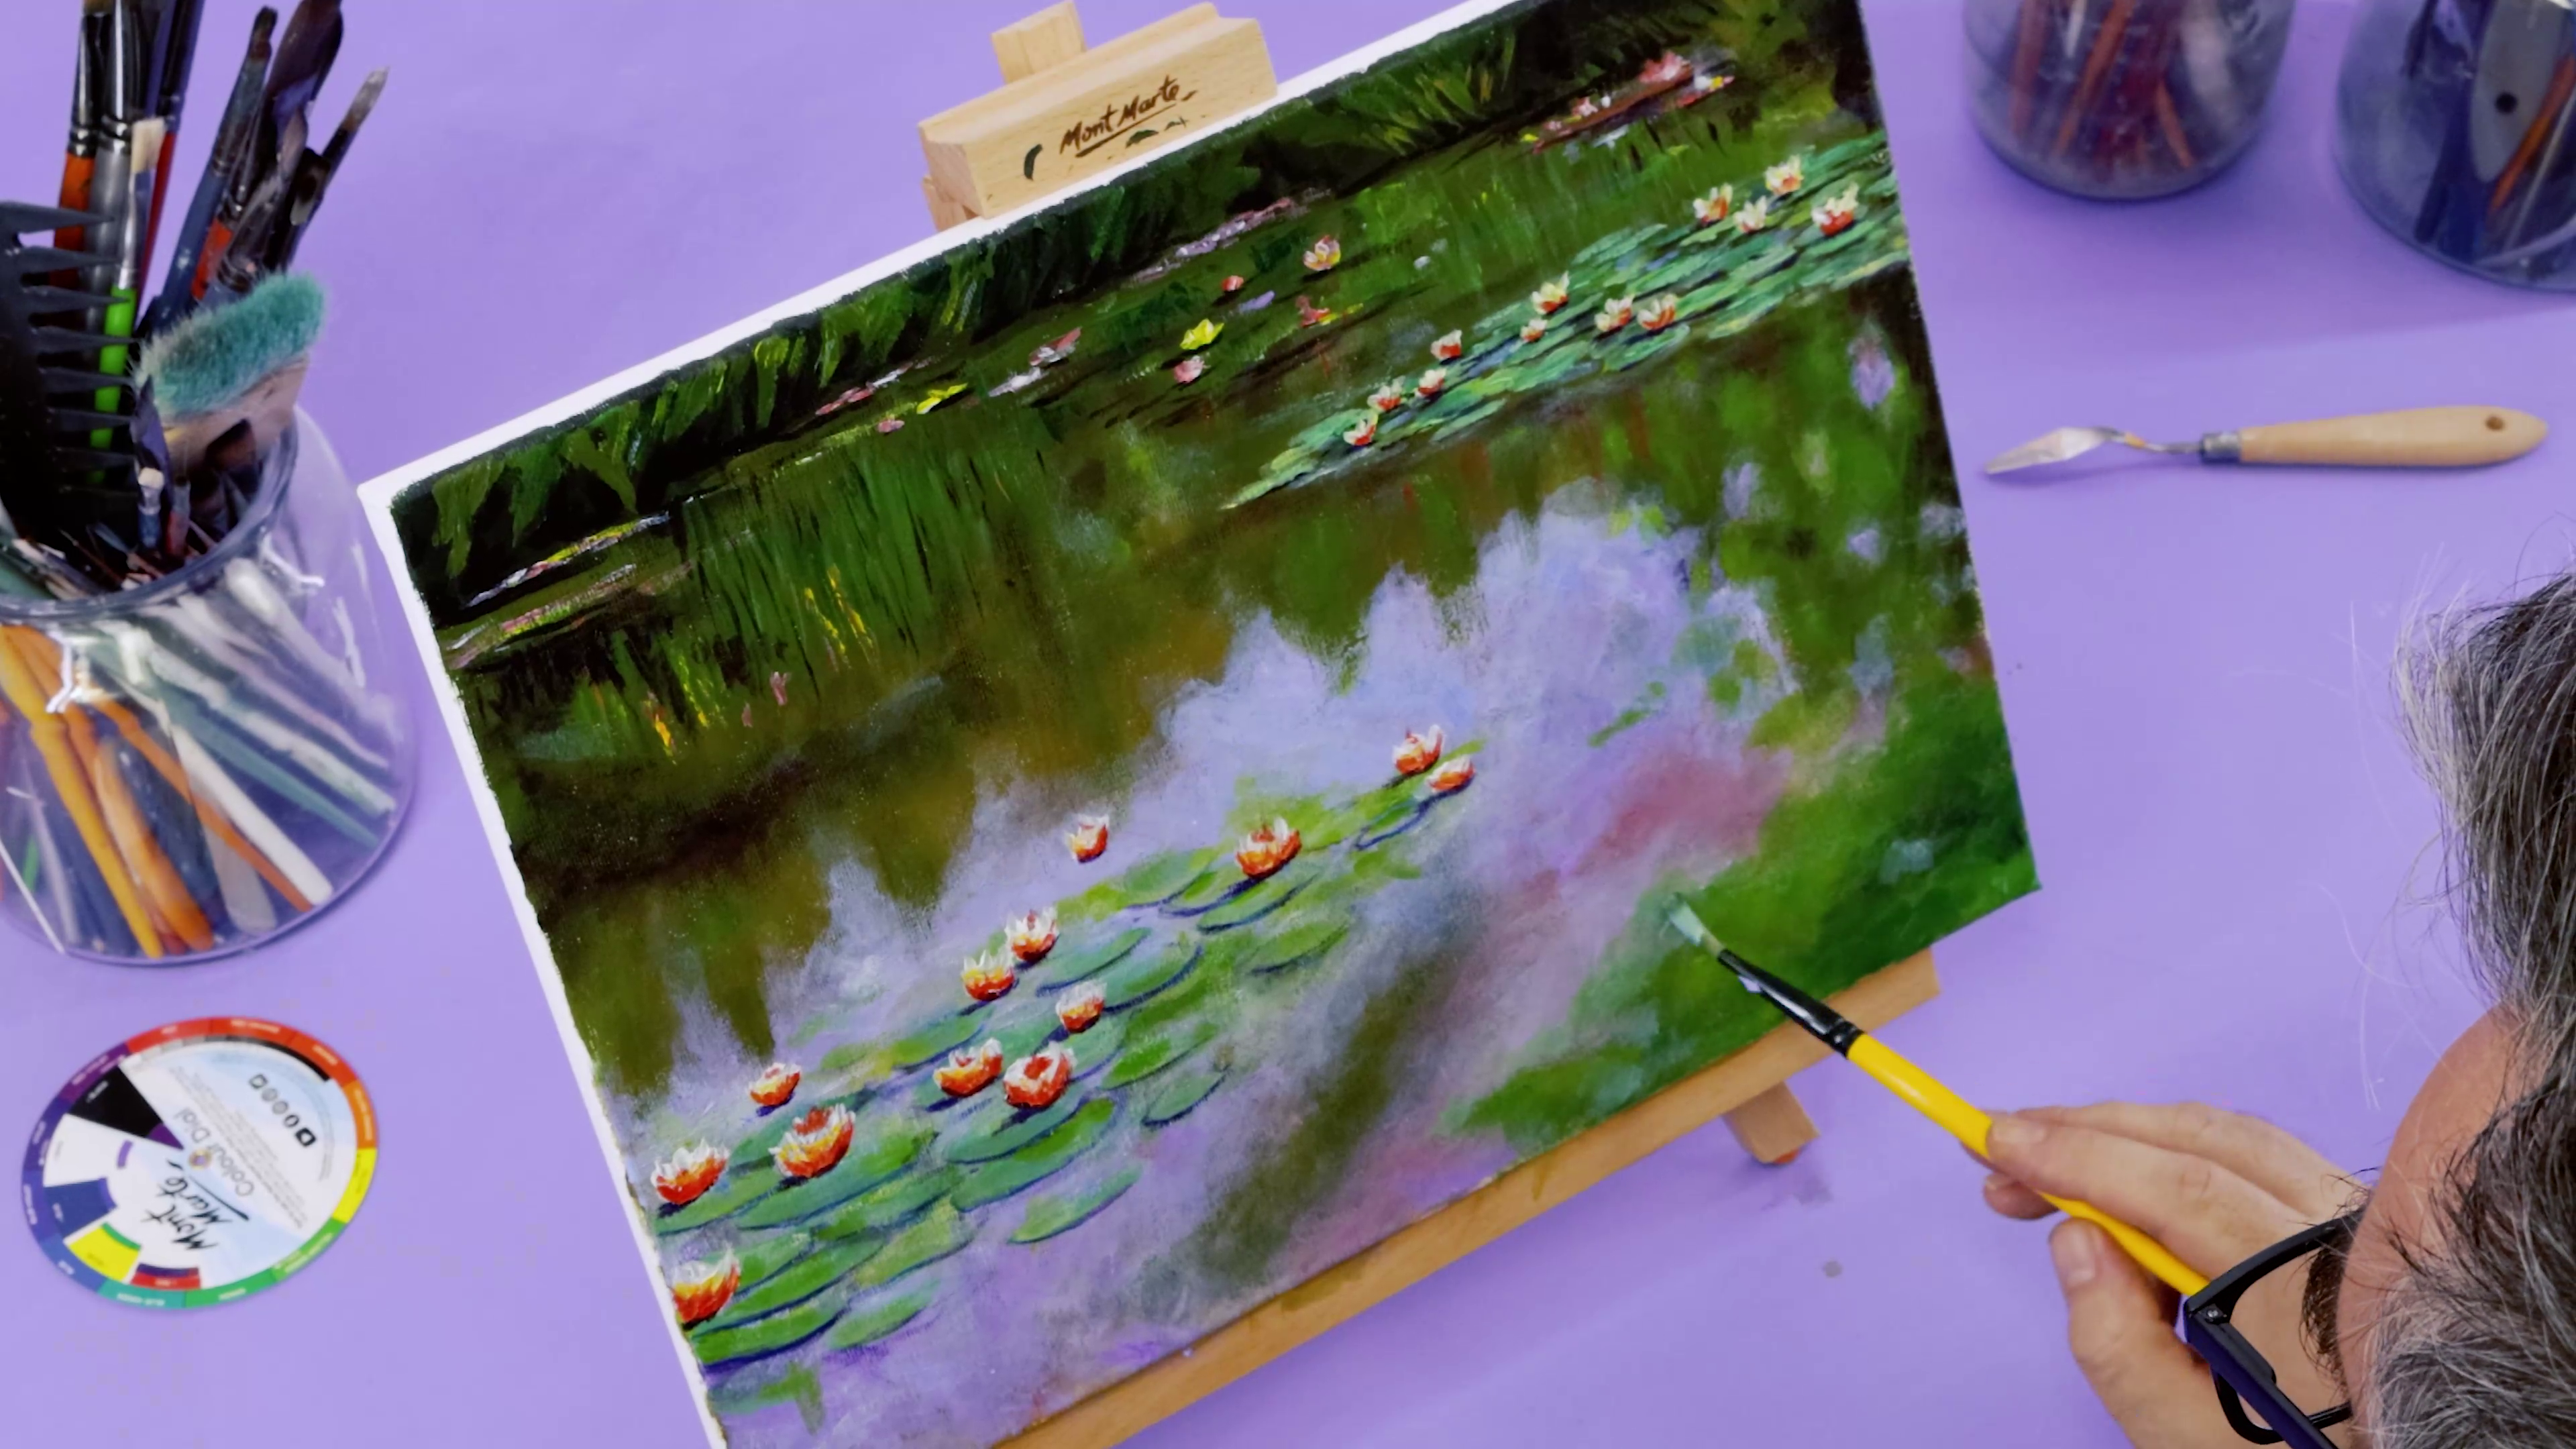 Blending paint on the canvas for a Monet-inspired project